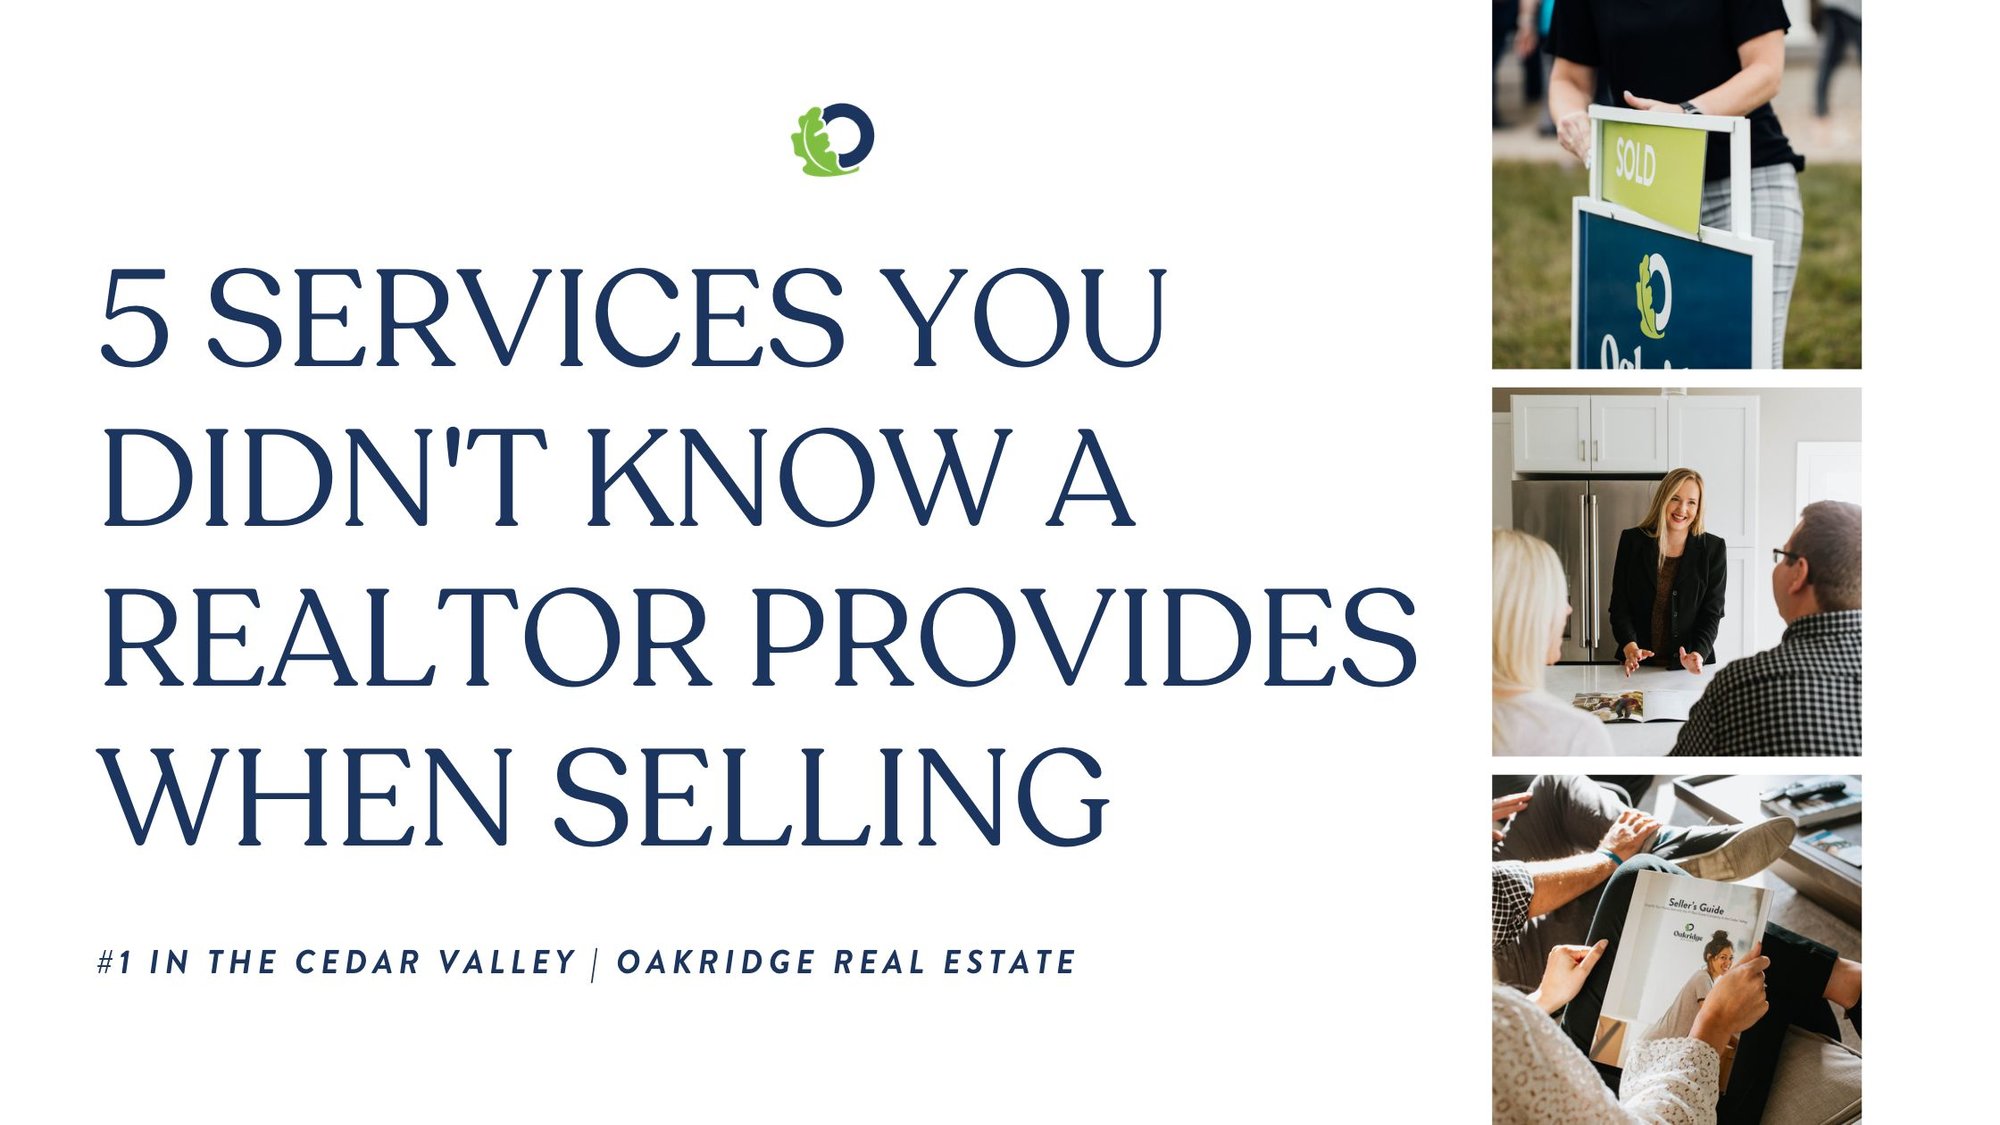 5 Services You Didn't Know A Realtor Provides When Selling Your Home